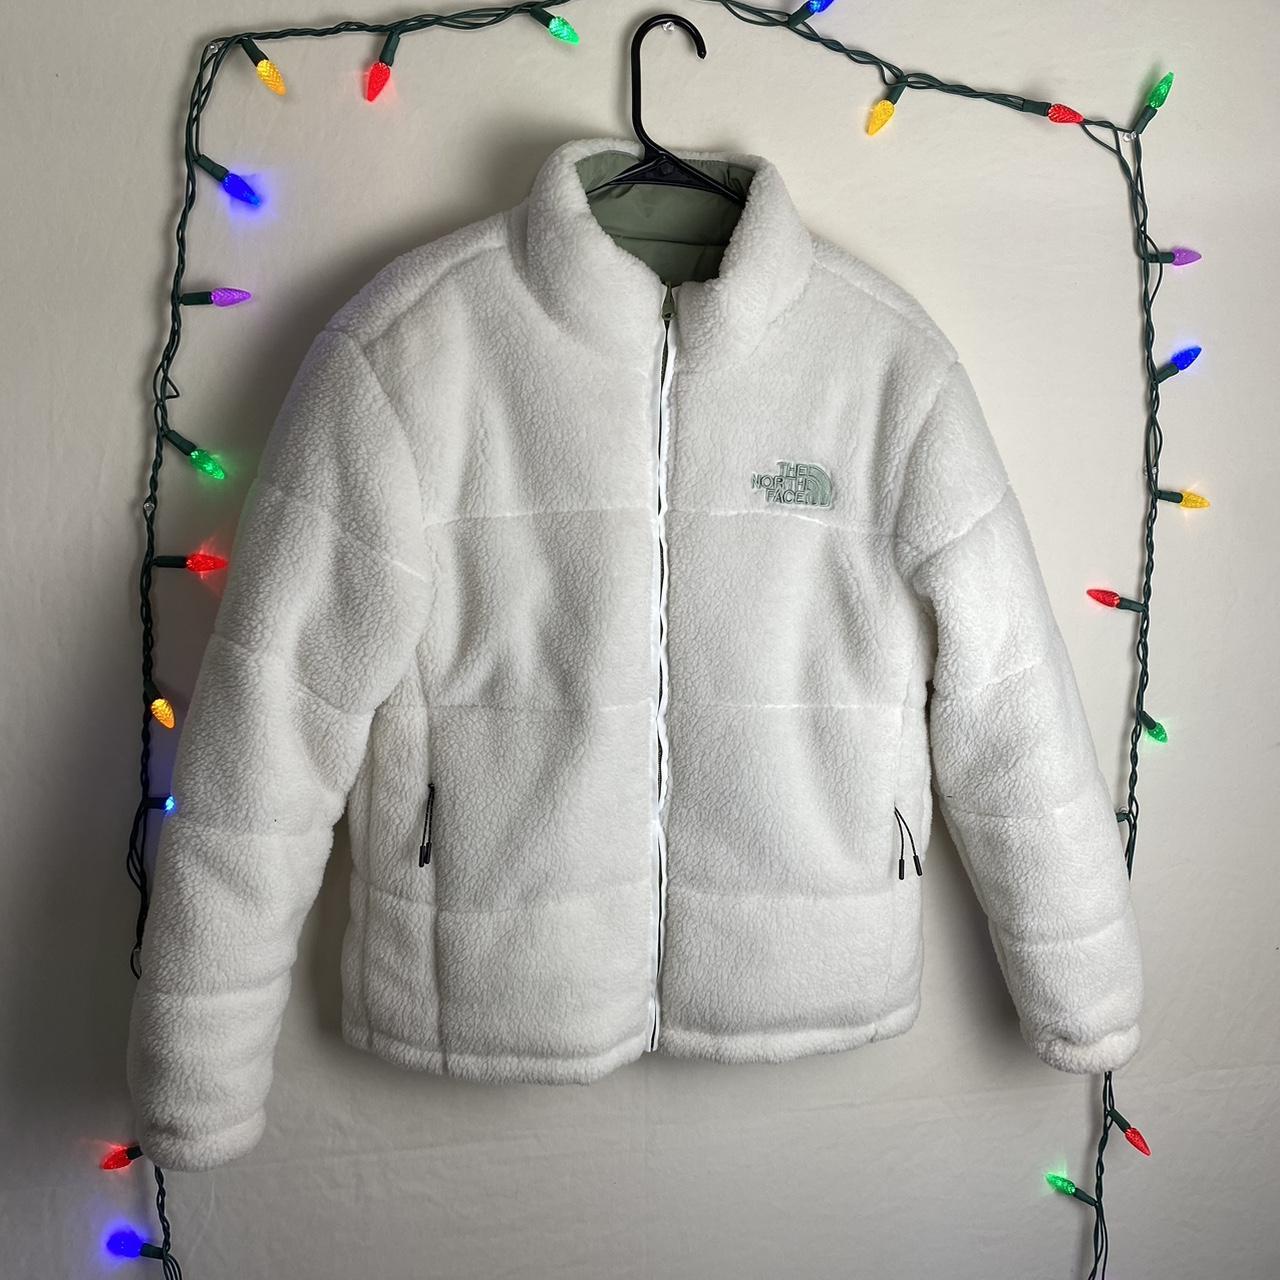 The North Face Women's White and Green Jacket